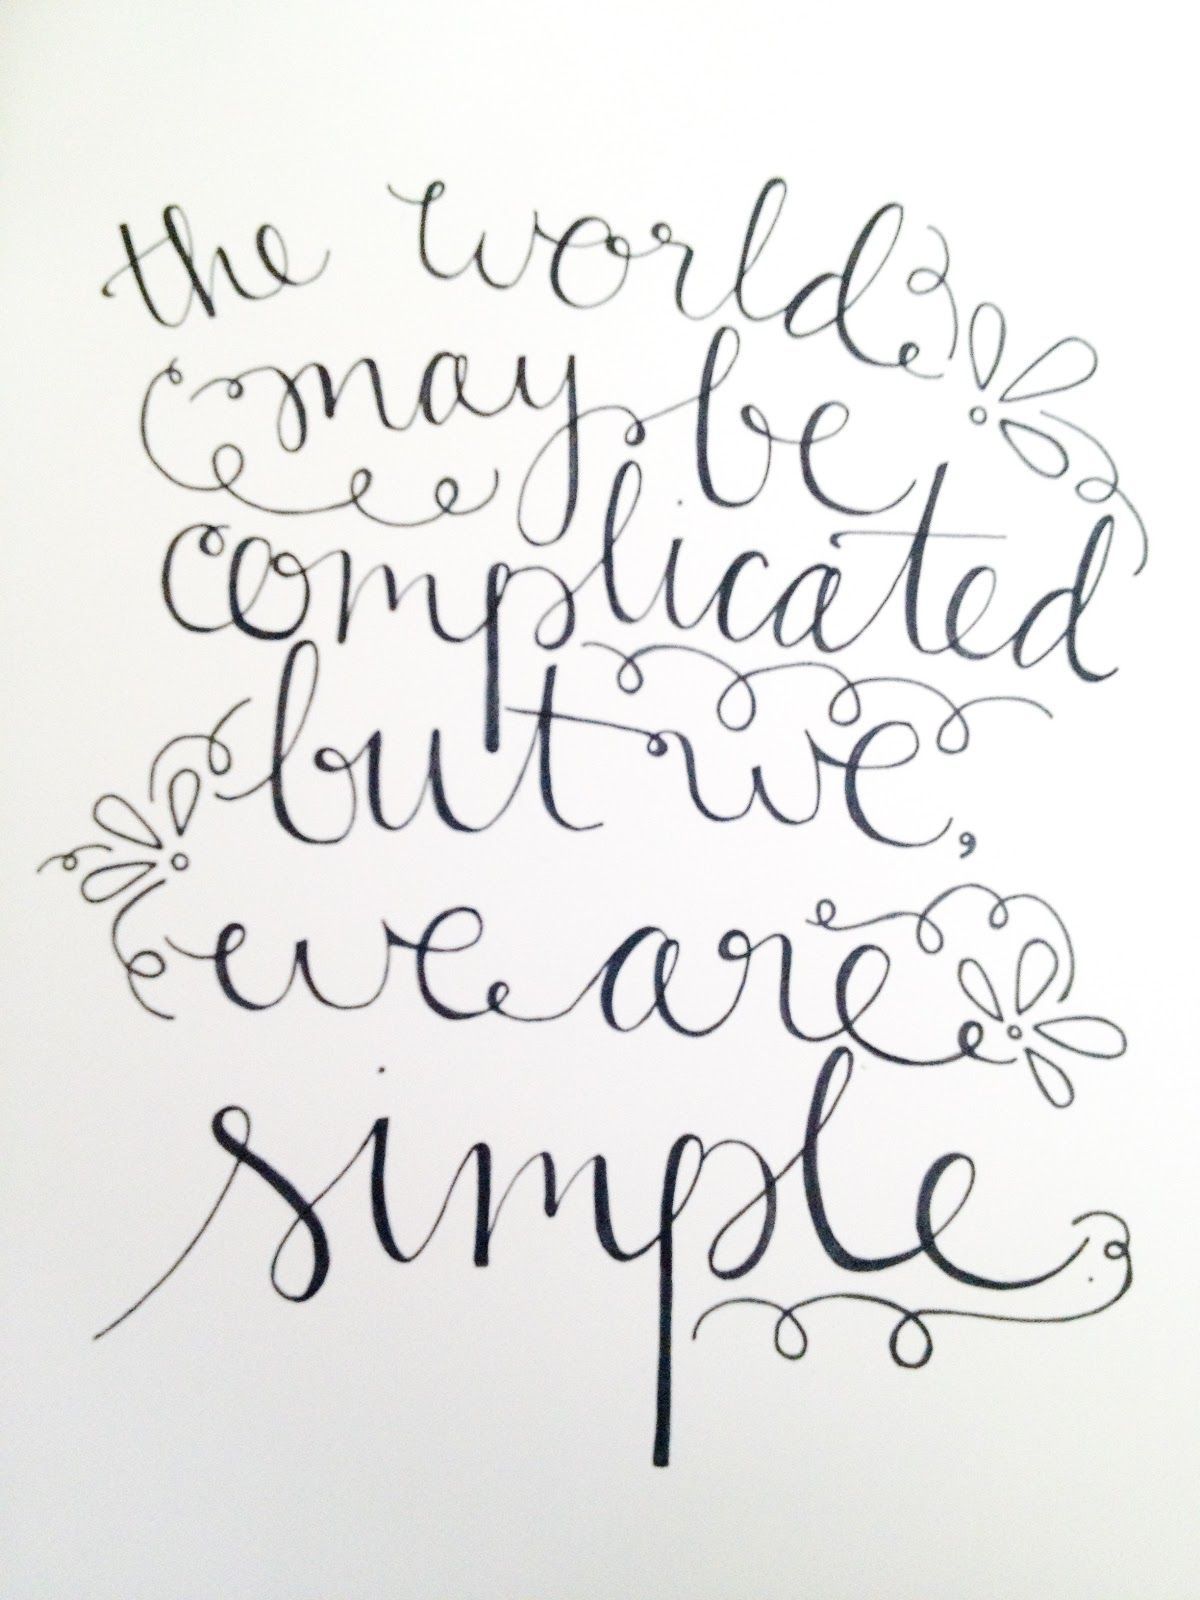 "the world may be complicated but we, we are simple"